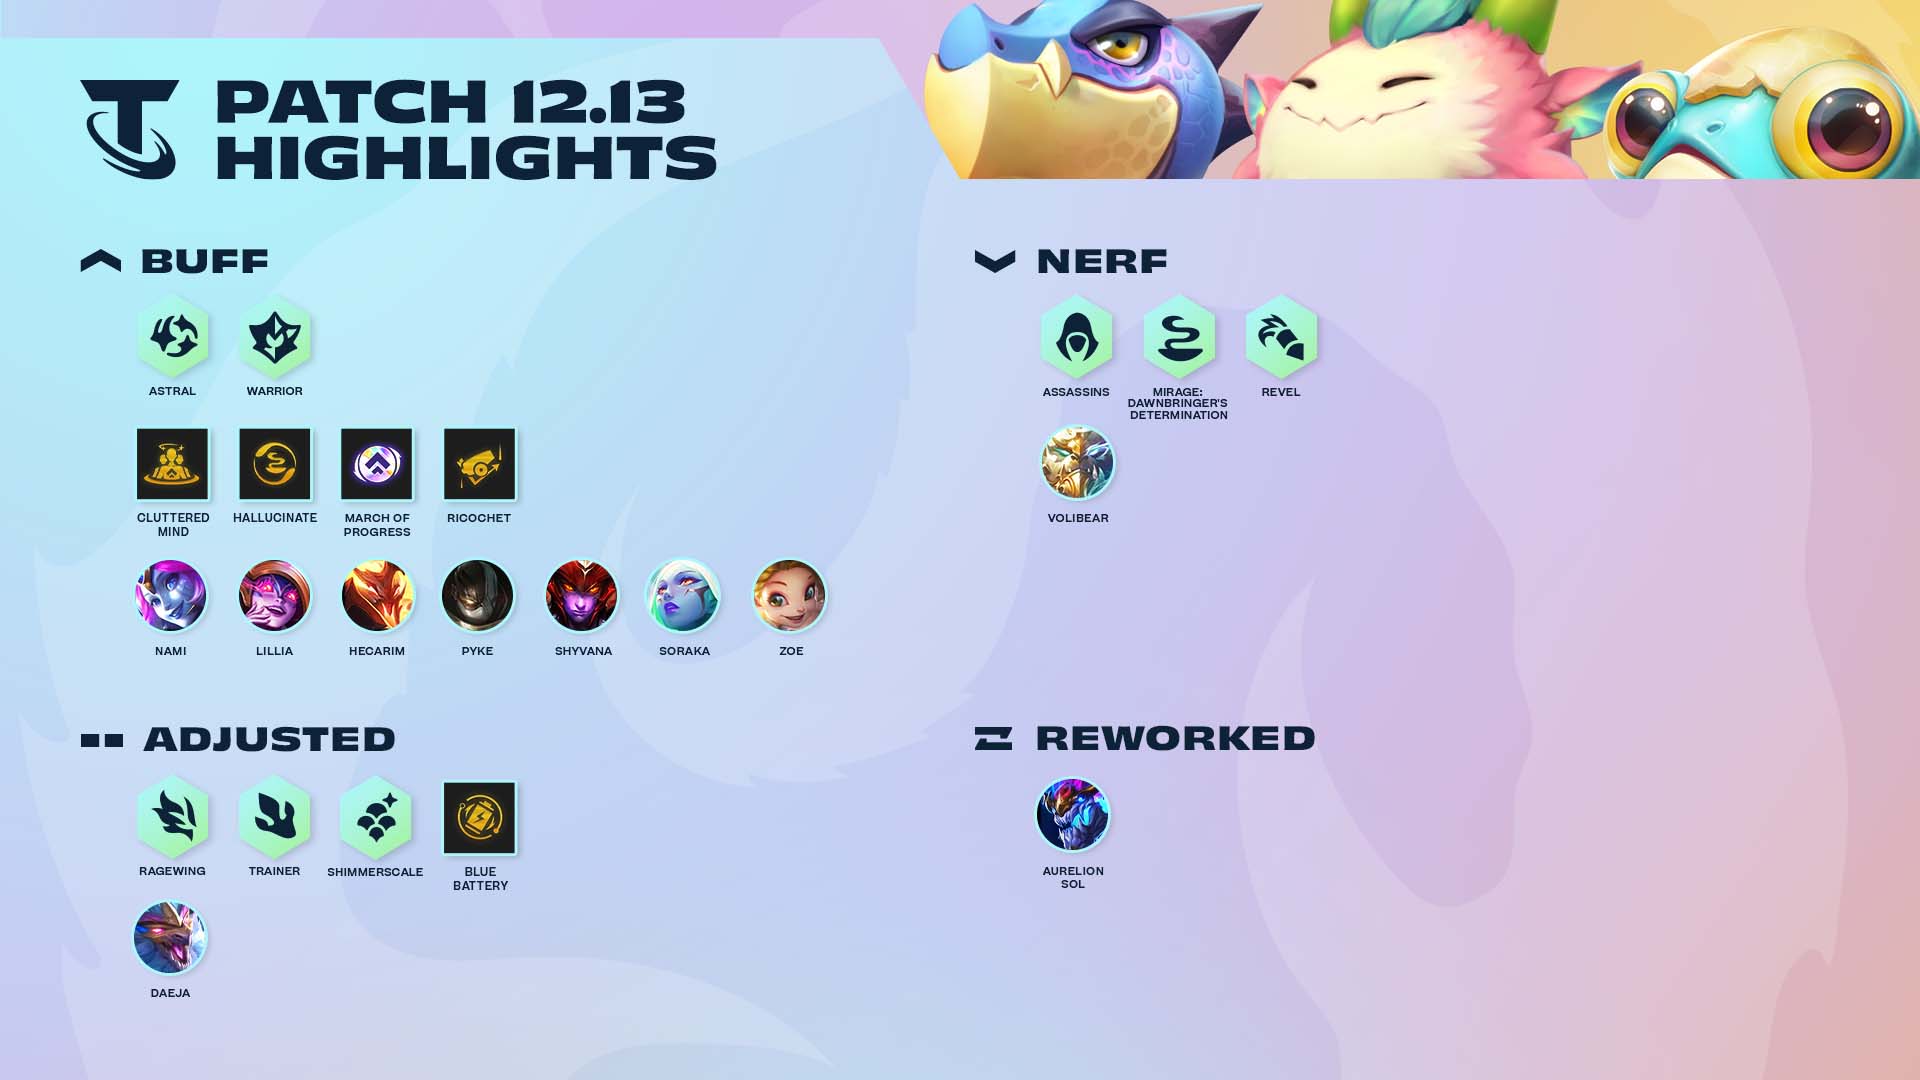 TFT Patch 12.13 Highlights